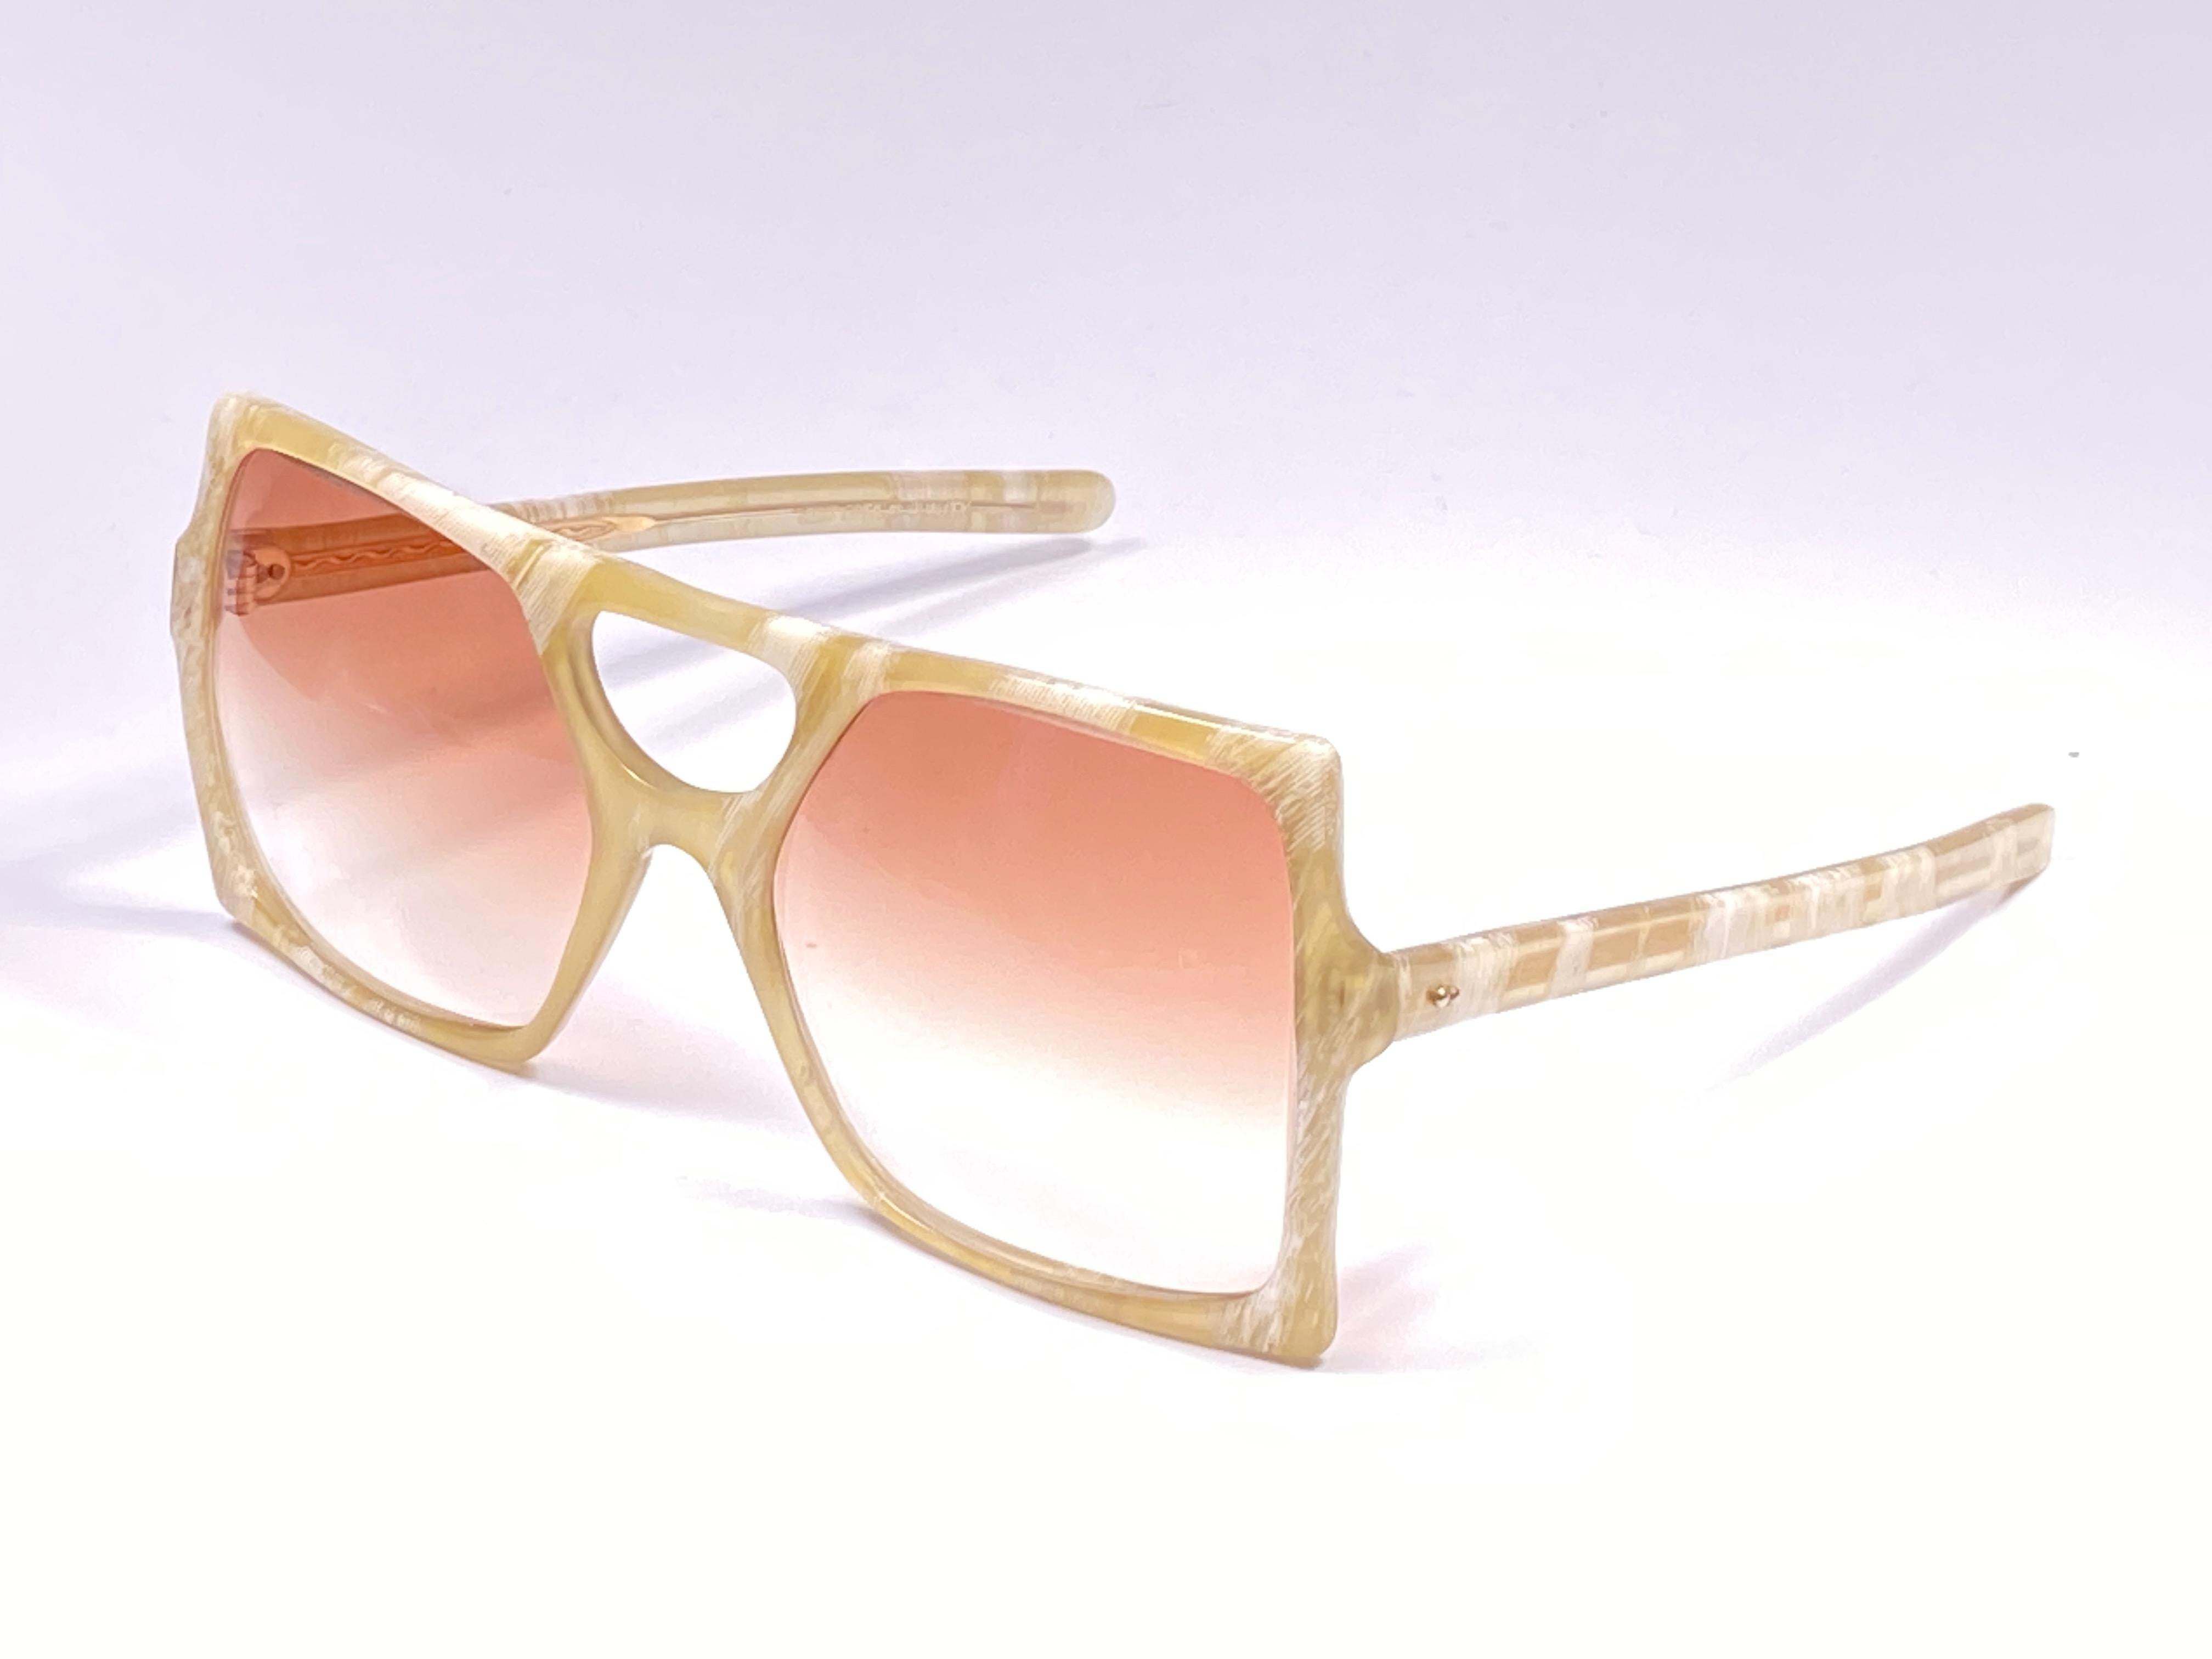 Vintage super rare oversized  beige with light brown lenses sunglasses. 

Amazing craftsmanship and style.

Measurements :
Front : 14 cms

Lens Height : 5.5 cms

Lens Width : 6 cms


